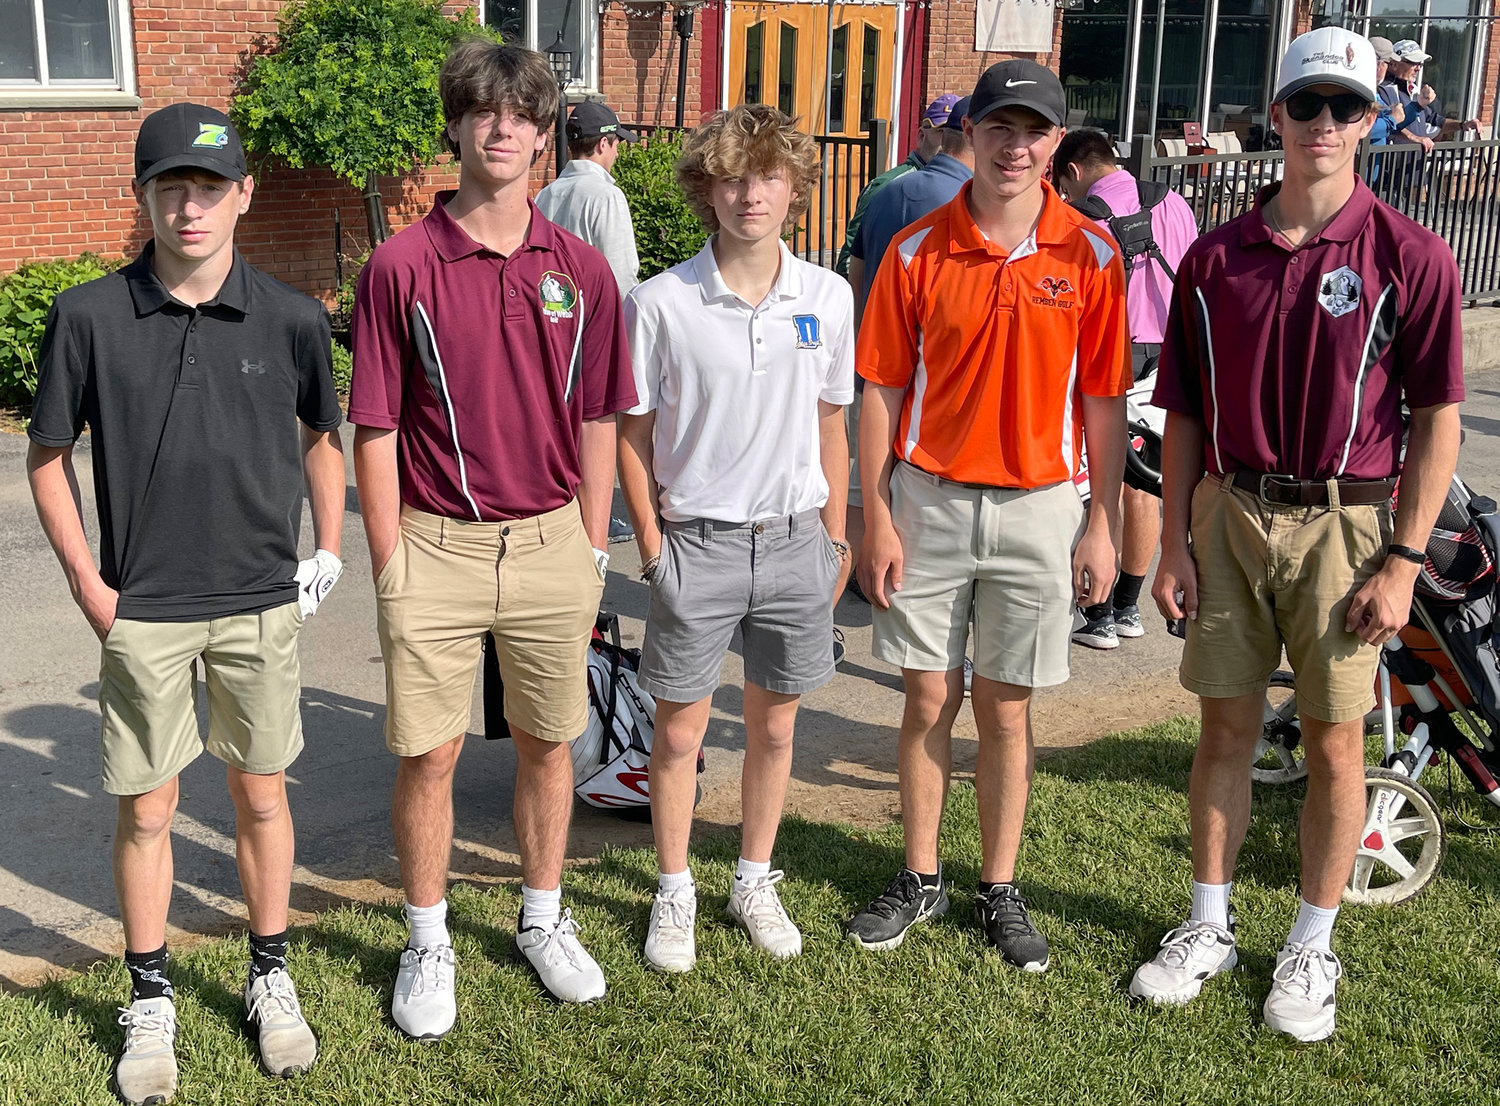 Five golfers from the Center State Conference North Division competed in the Section III state qualifier tournament Wednesday. From left: Adirondack's Jack Hutton, Charles LaFavour of Old Forge, Dolgeville's Aiden Davies, Brian Secor of Remsen and Robert LaFavour of Old Forge.